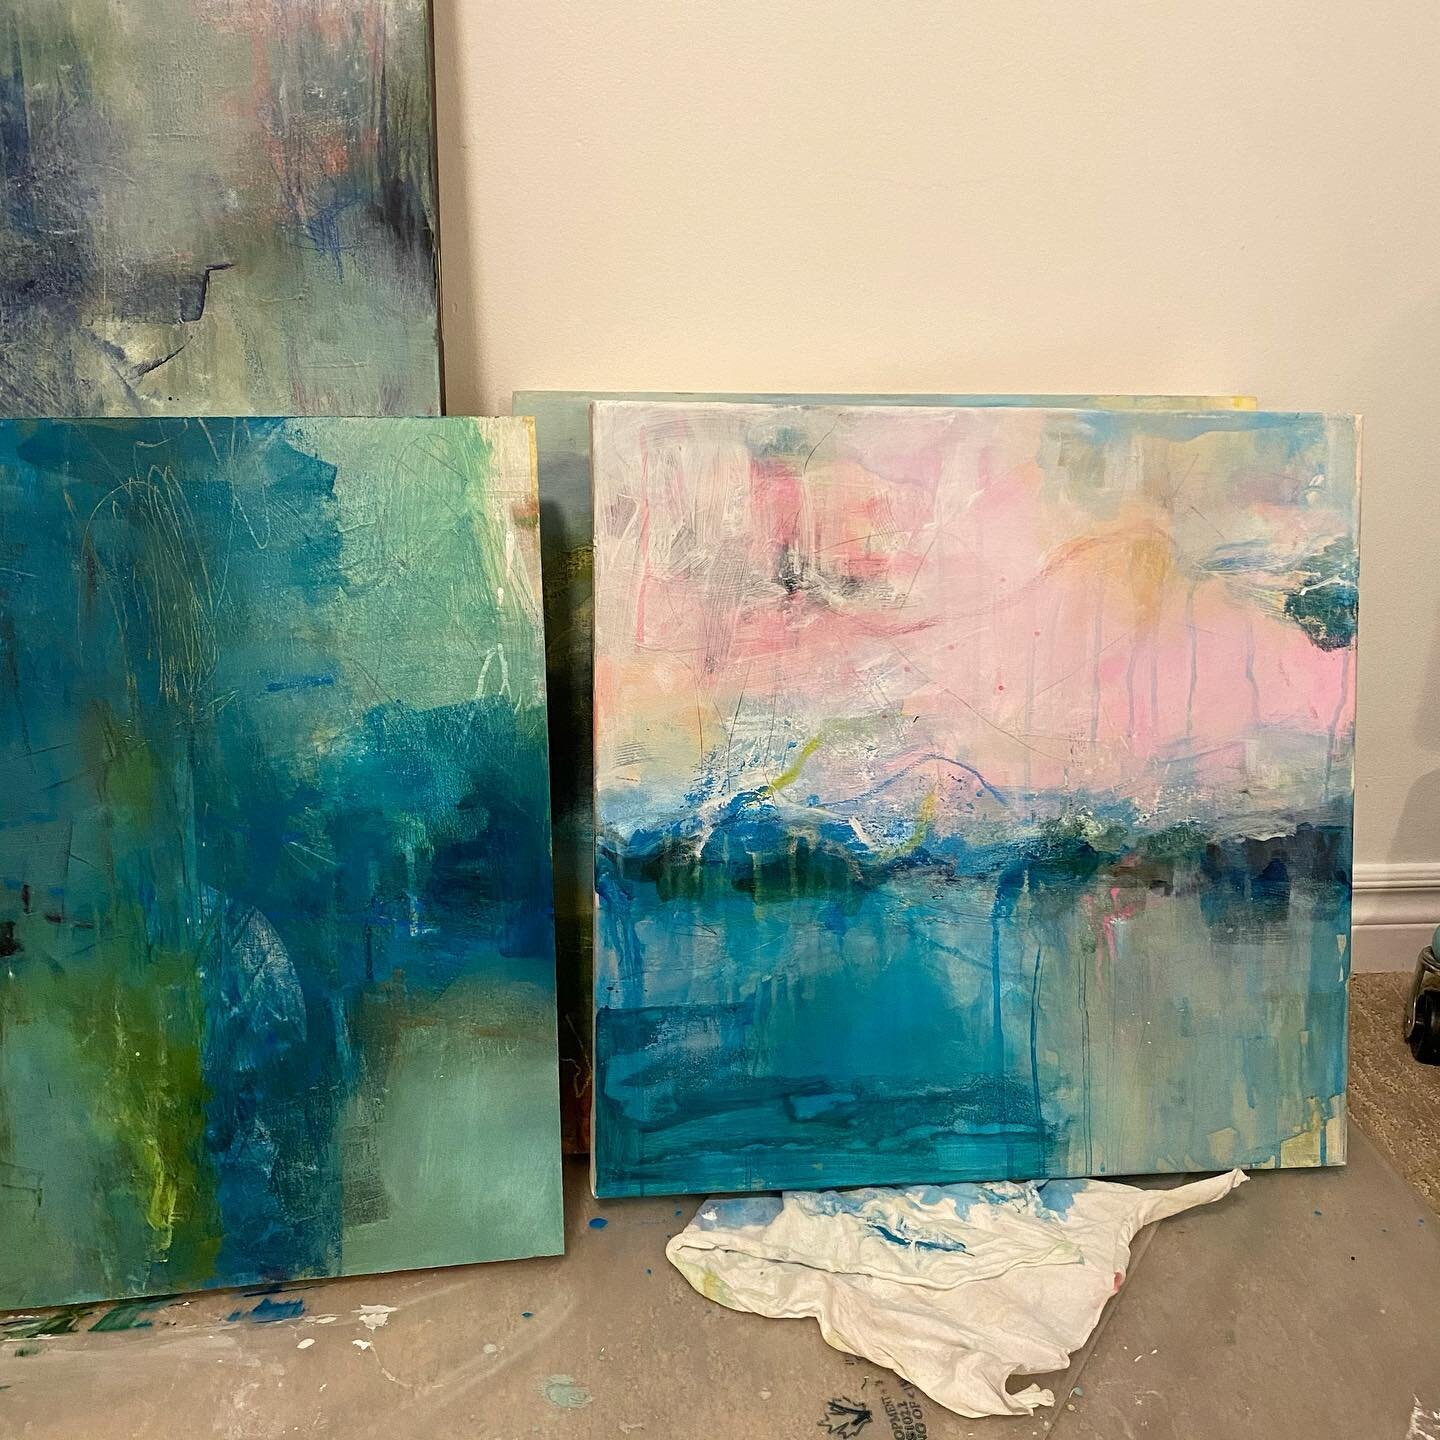 Work in progress.

#kylalynneperry #abstract #abstractexpressionism #acrylicpainting #art #artist #painting #painter #abstractart #abstractartist #abstractpainting #abstractpainter #originalart #contemporaryart #contemporaryartist #modernart #moderna